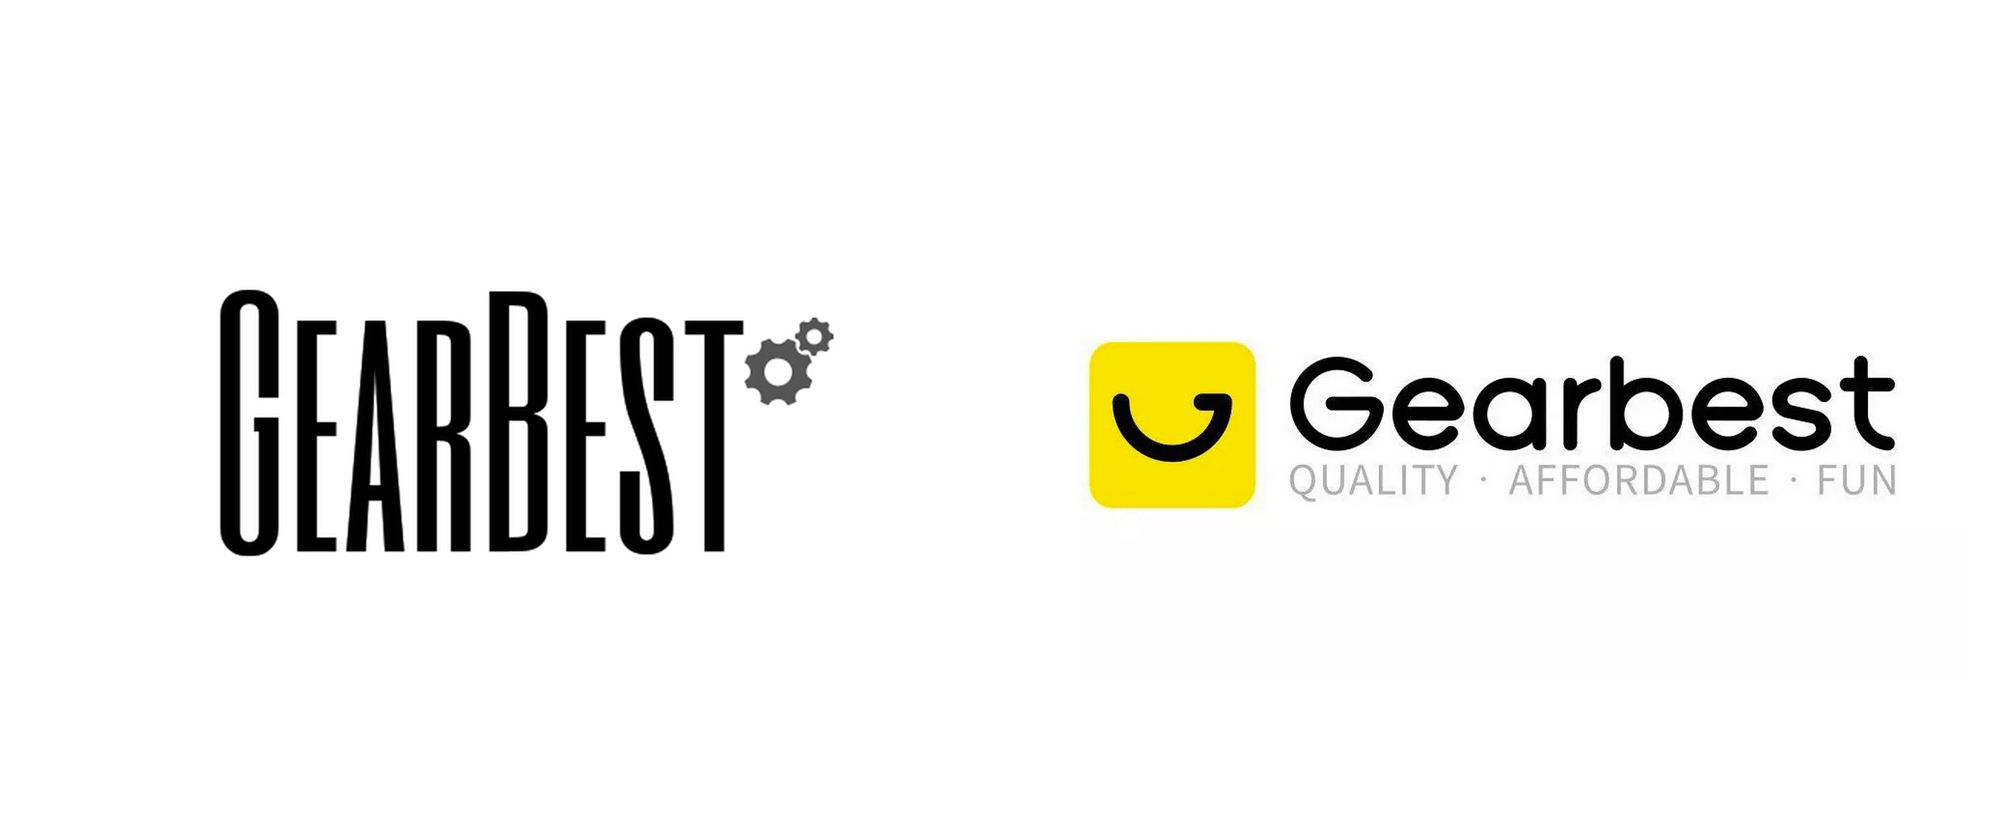 New Logo and Identity for Gearbest